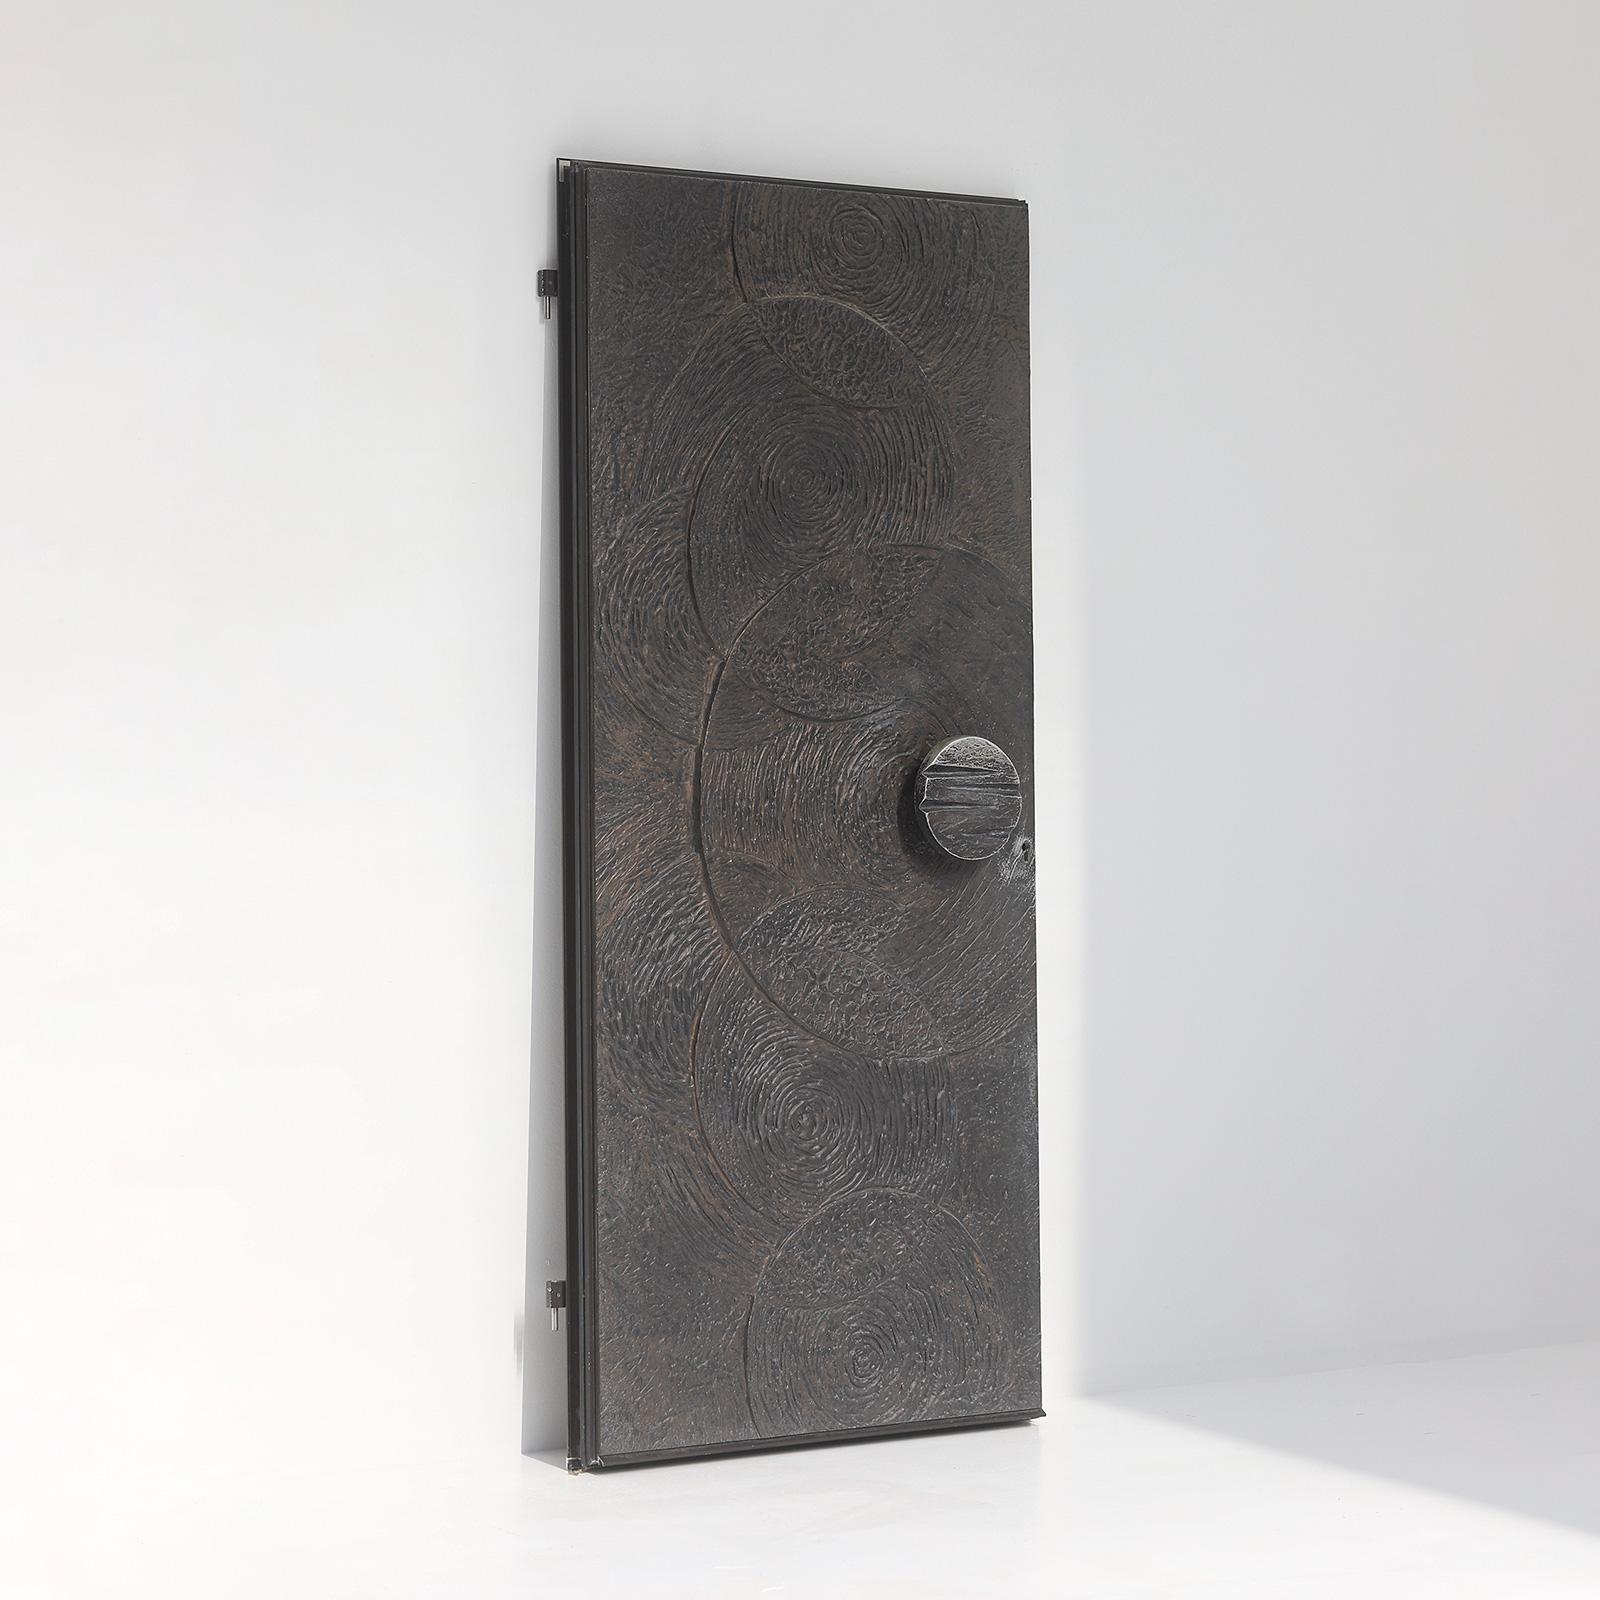 Impressive door with a circled pattern, made in the 1970s. The door is made of aluminium and metal. It has a decorative pattern with carved circles. The door handle is a reflection of the pattern. Very decorative and unique in find, can be used as a